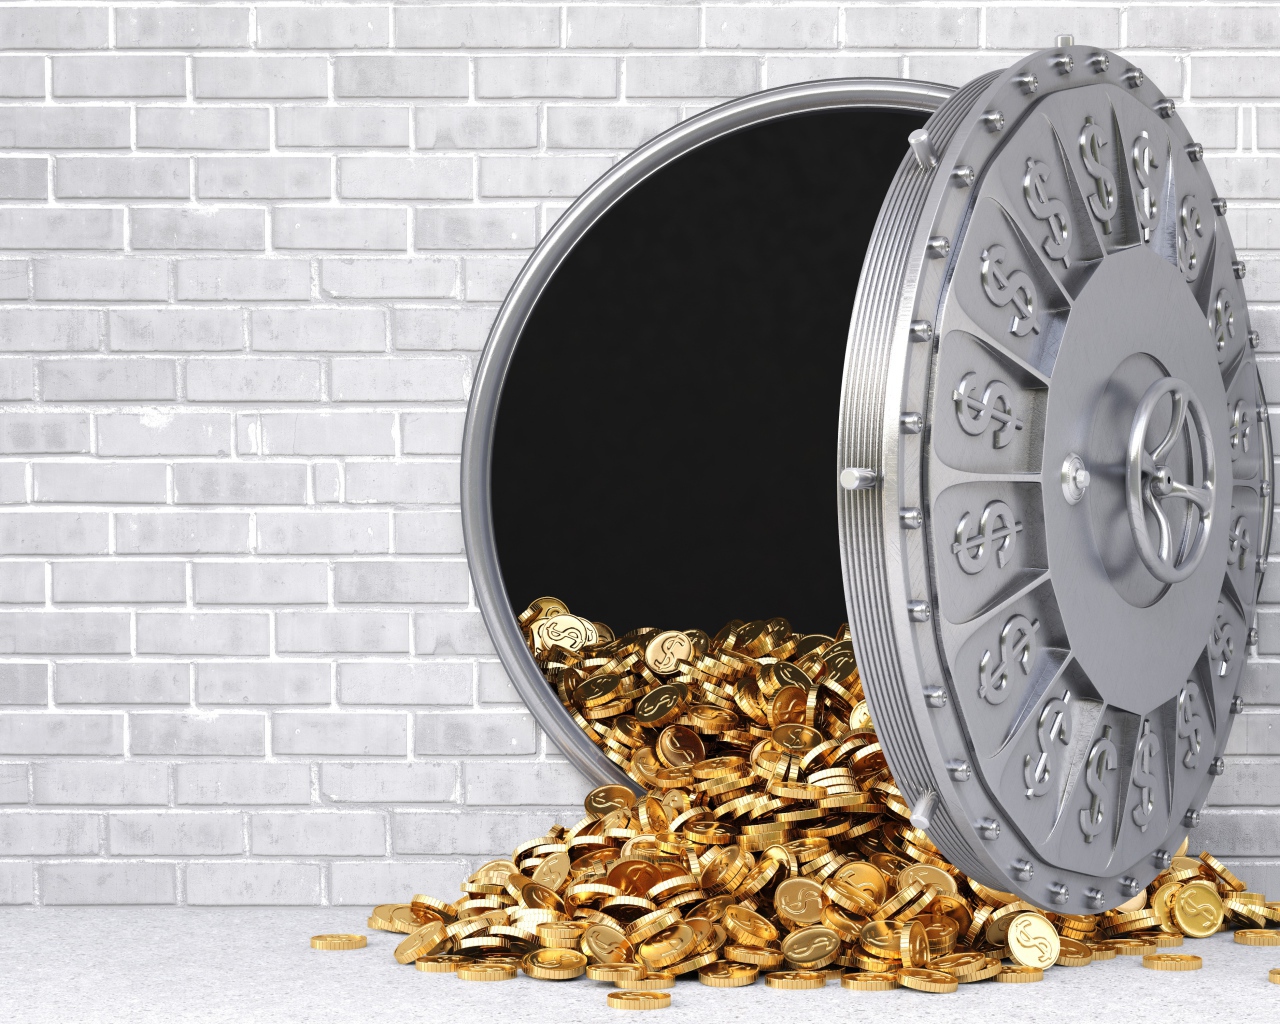 Gold coins fall out of the safe in a gray wall